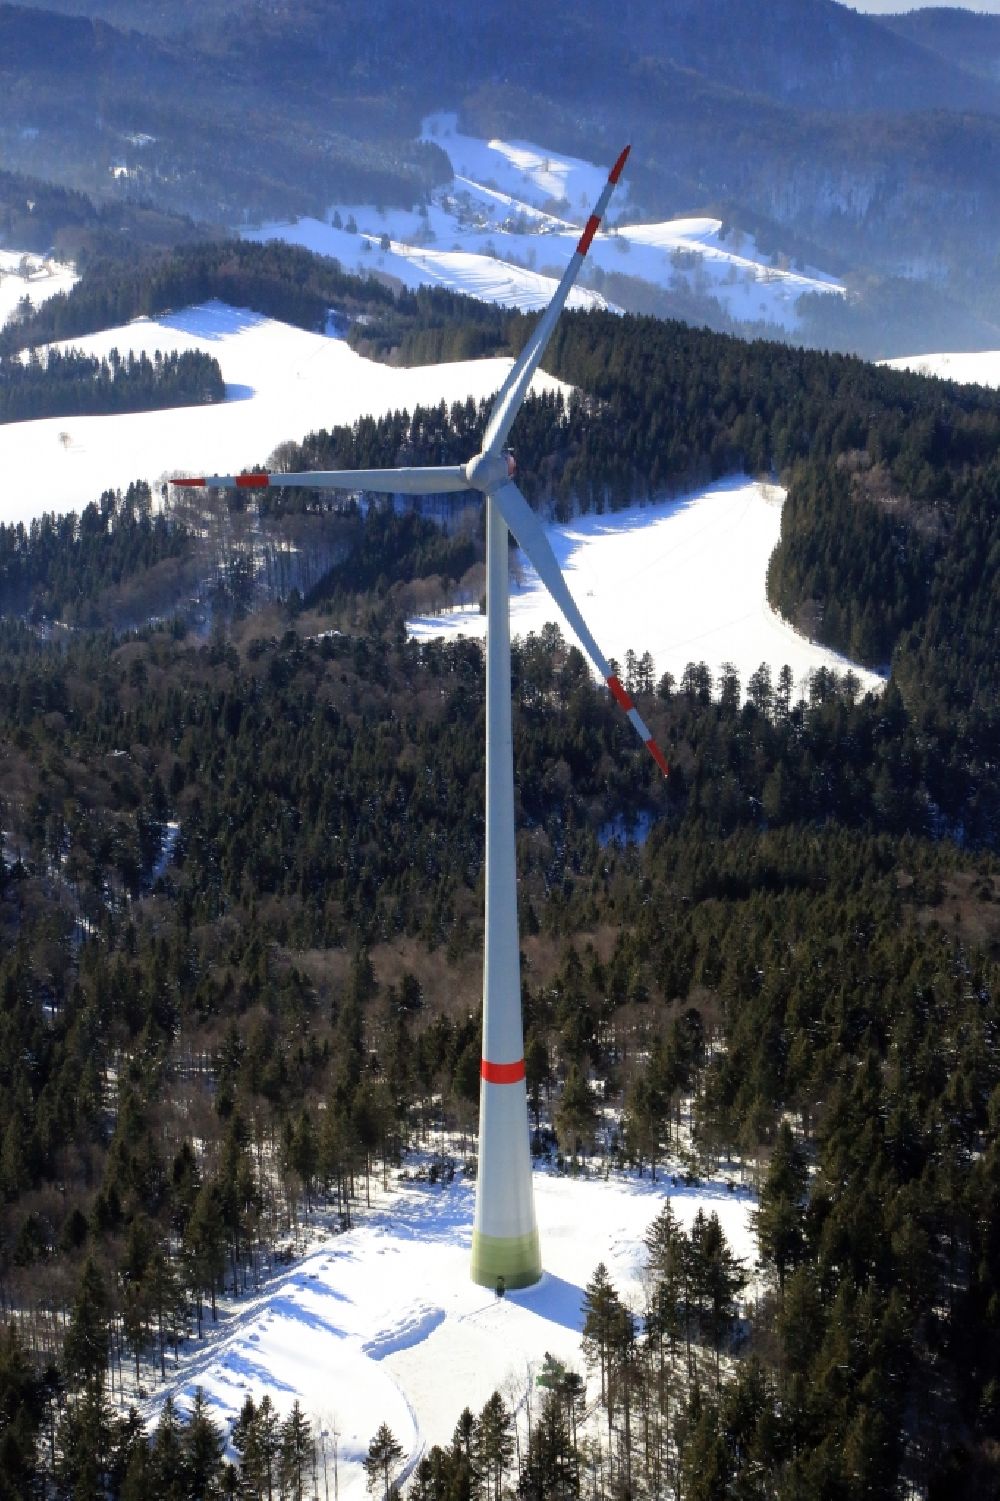 Aerial image Schopfheim - On the snow covered Rohrenkopf, the local mountain of Gersbach, a district of Schopfheim in Baden-Wuerttemberg, wind turbines have started operation. It is the first wind farm in the south of the Black Forest